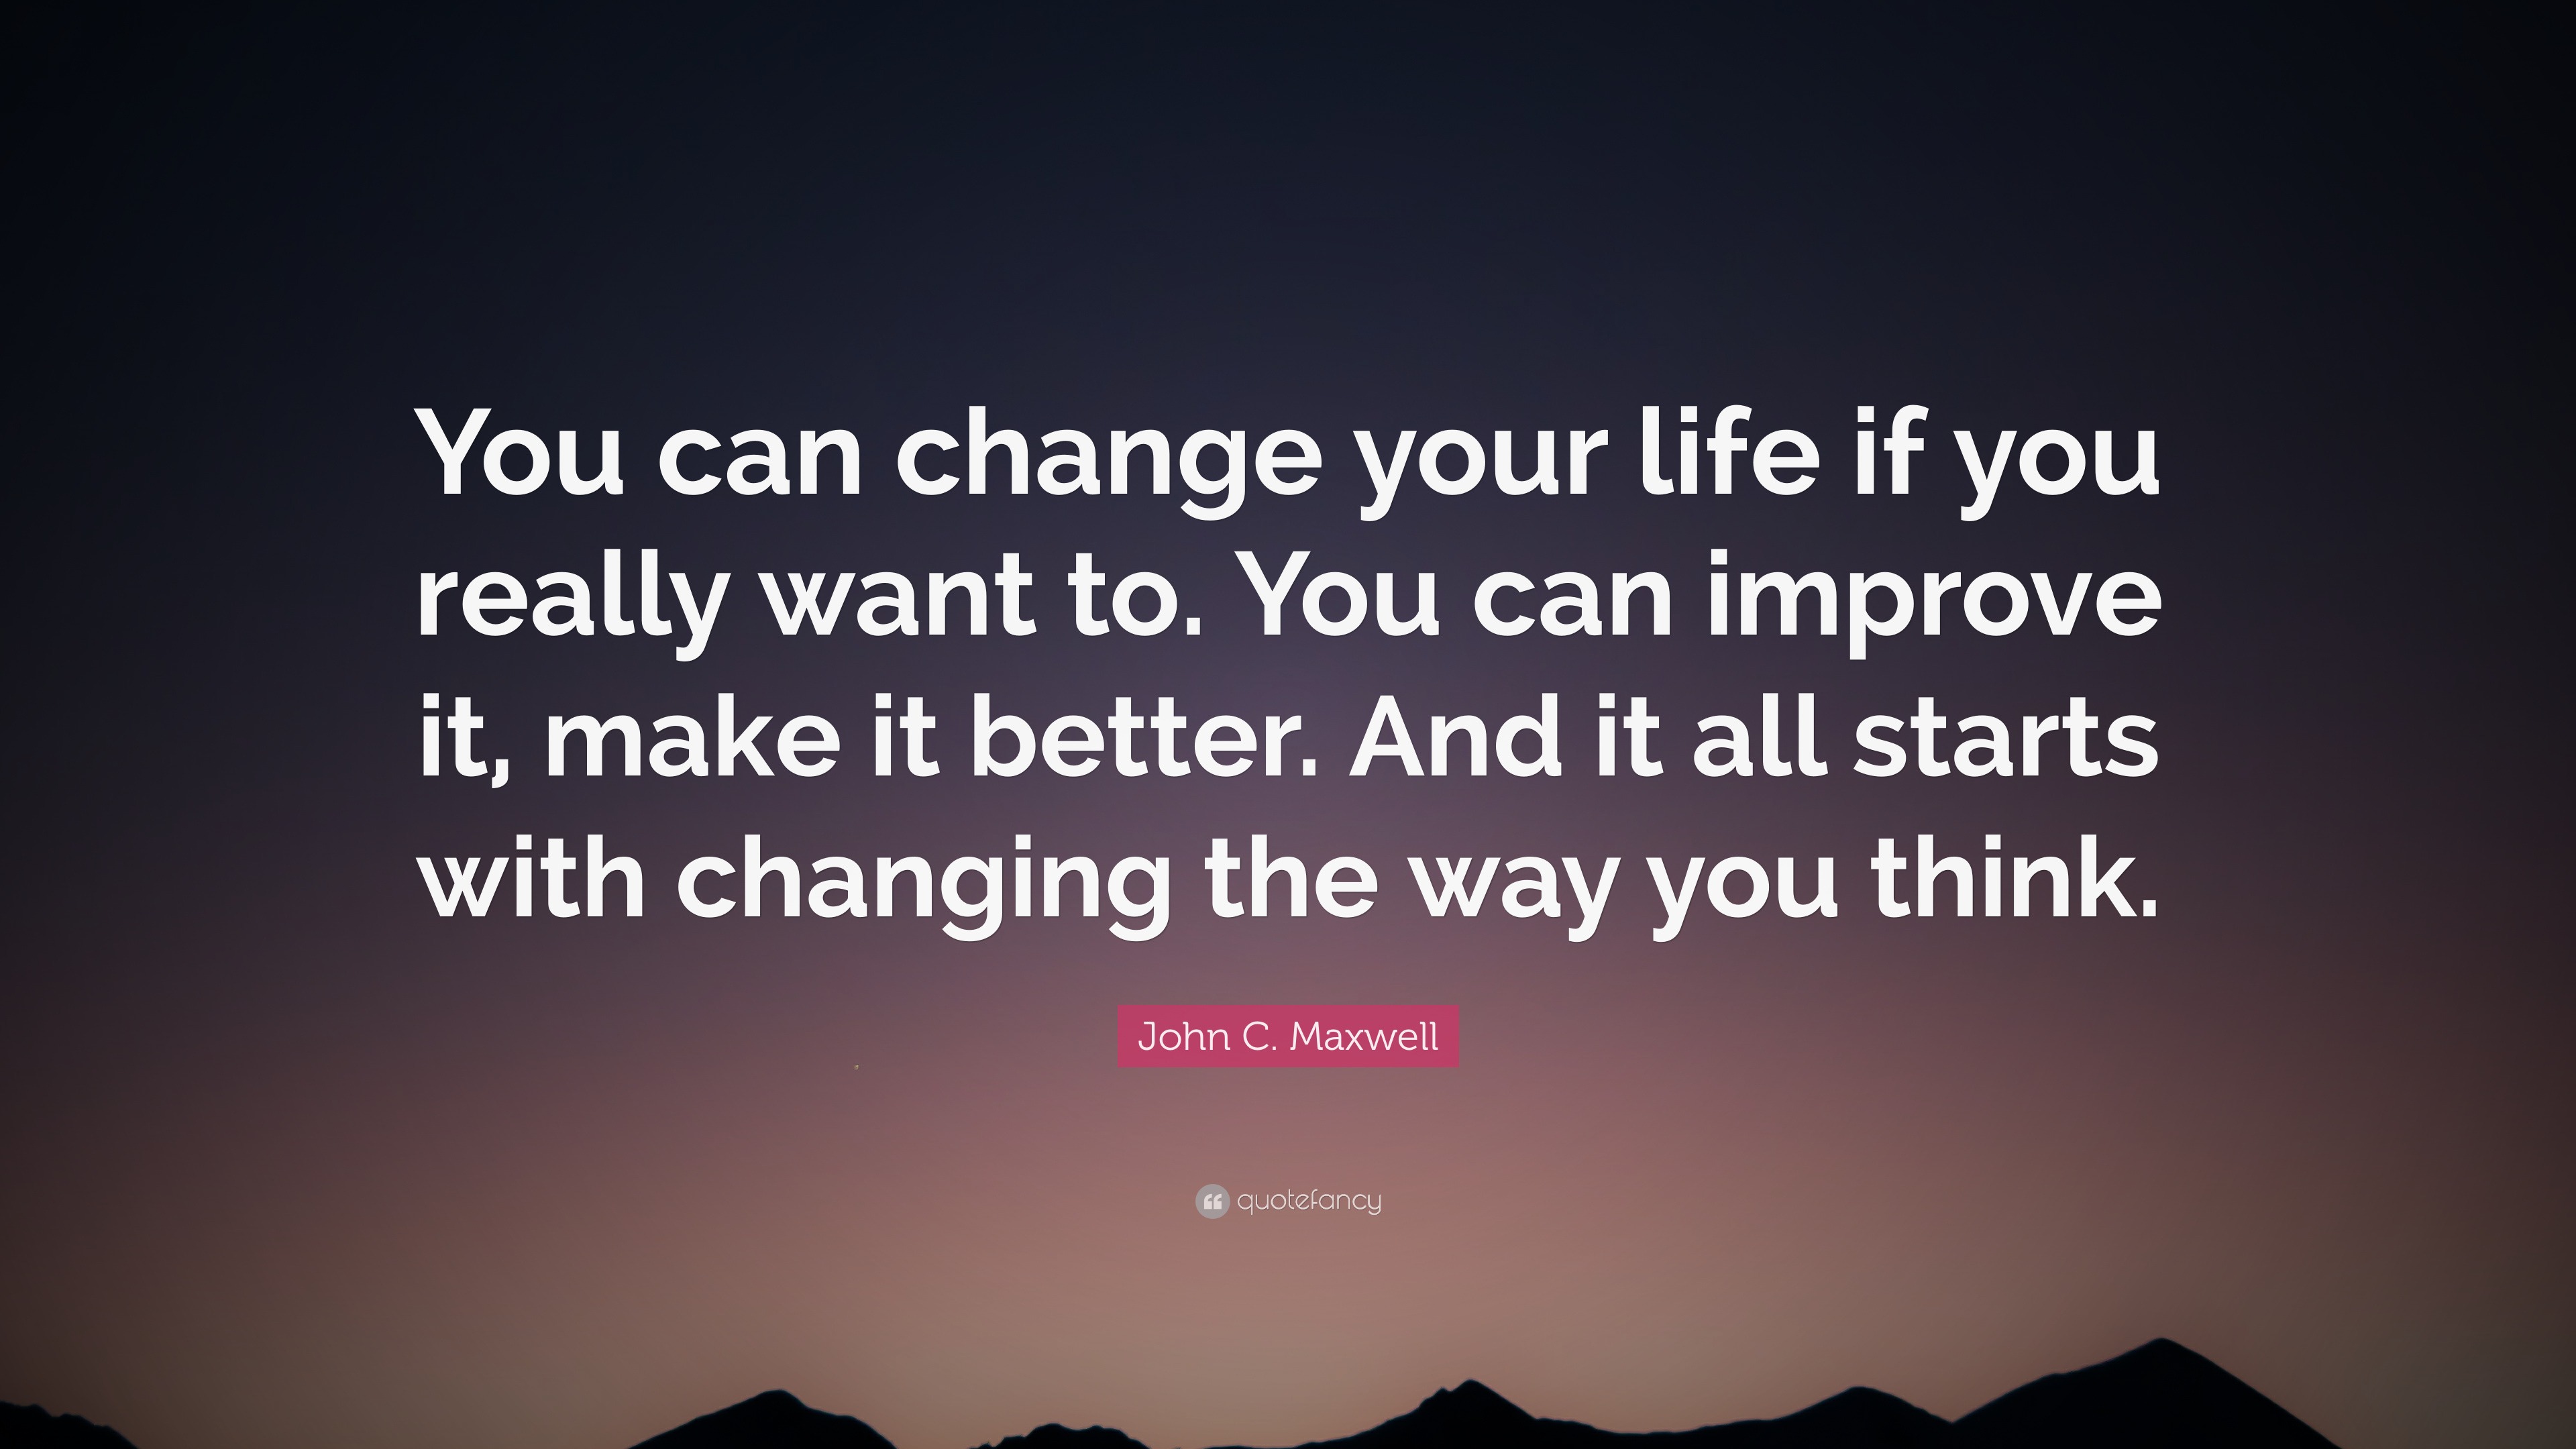 John C. Maxwell Quote: “You can change your life if you really want to ...